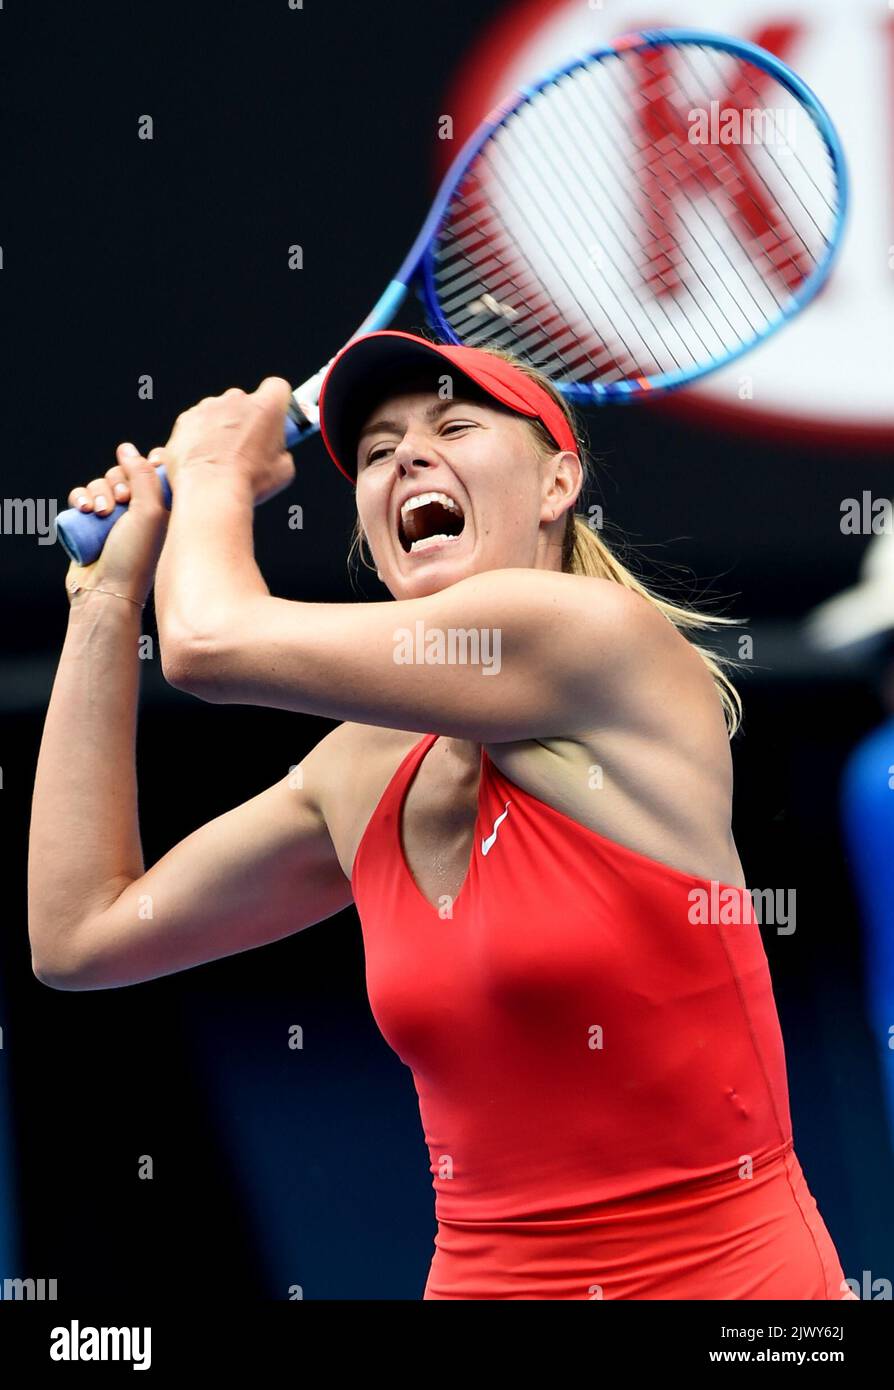 Maria Sharapova of Russia scores match point against Alexandra Panova of  Russia during the Australian Open at Melbourne Park, Melbourne, Wednesday,  Jan. 21, 2015. The Australian Open tennis tournament will go from